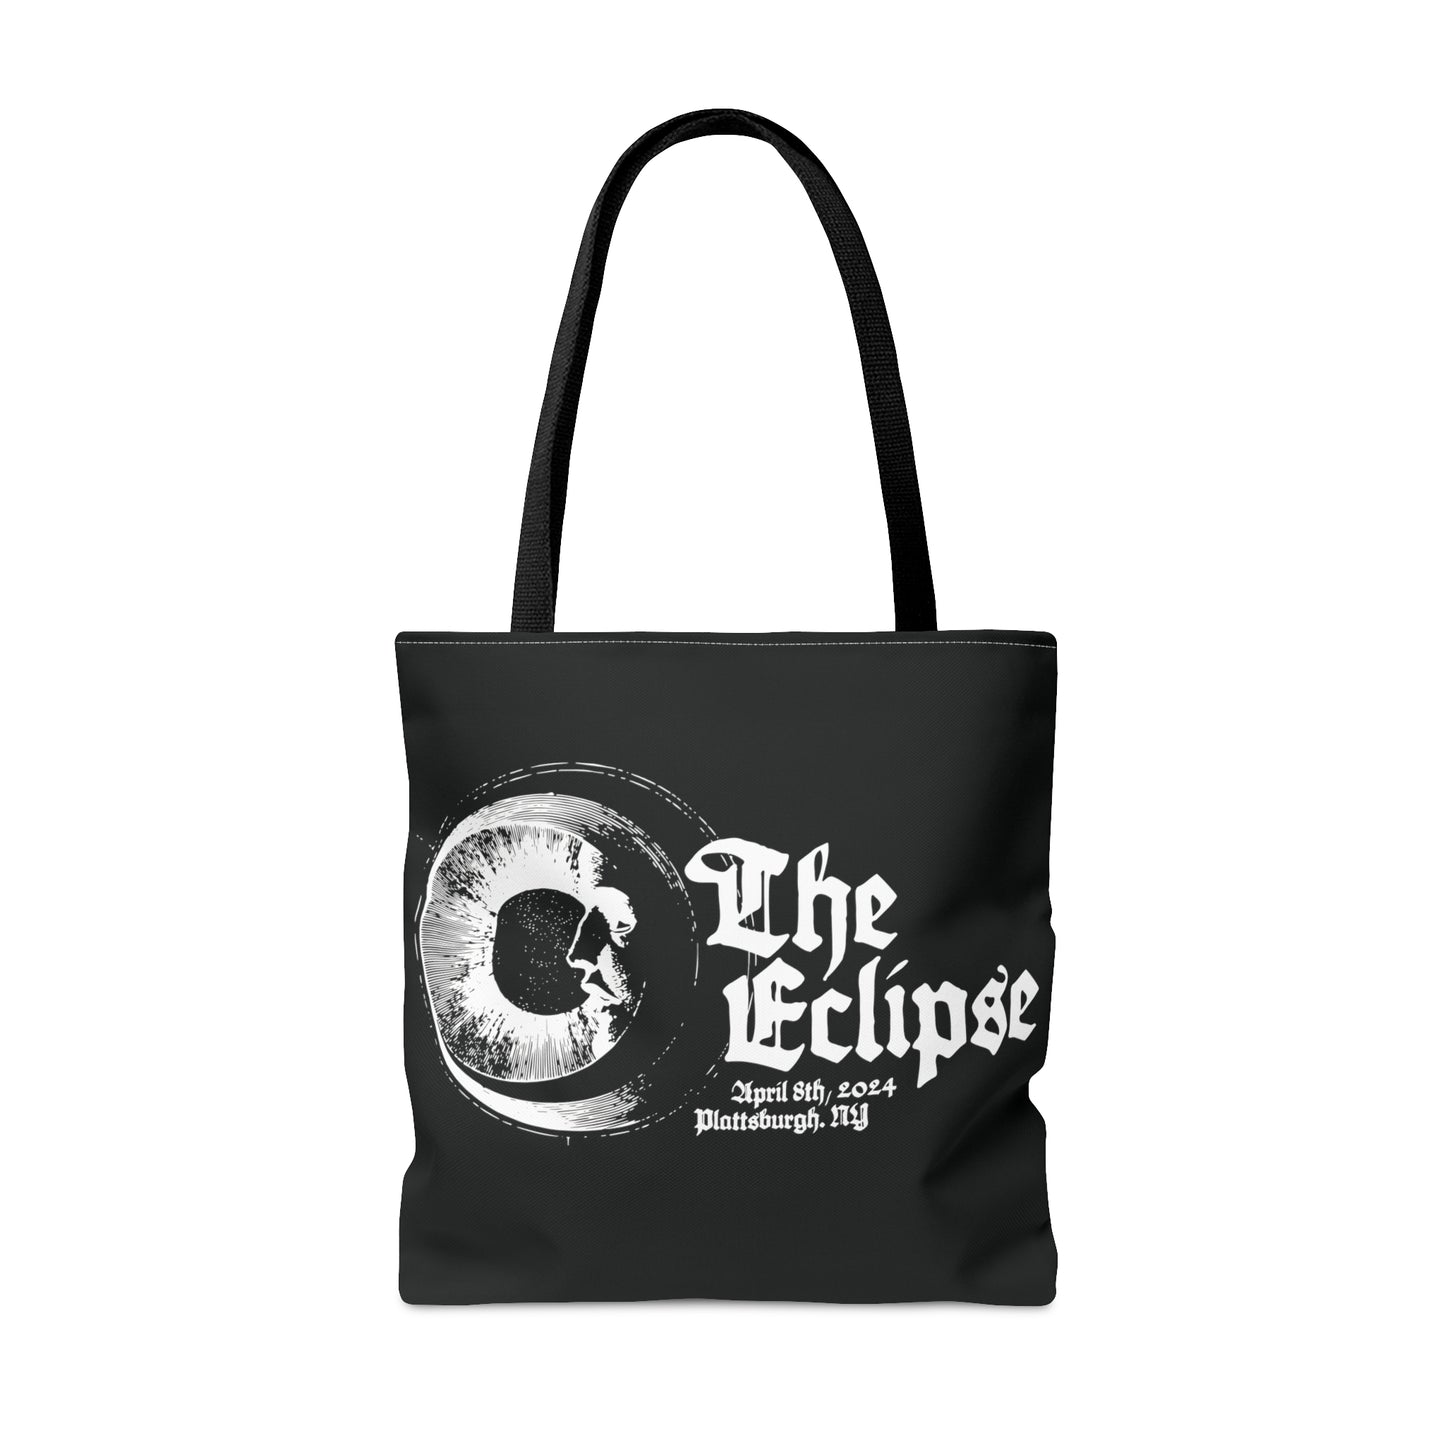 The Man on The Moon Tote